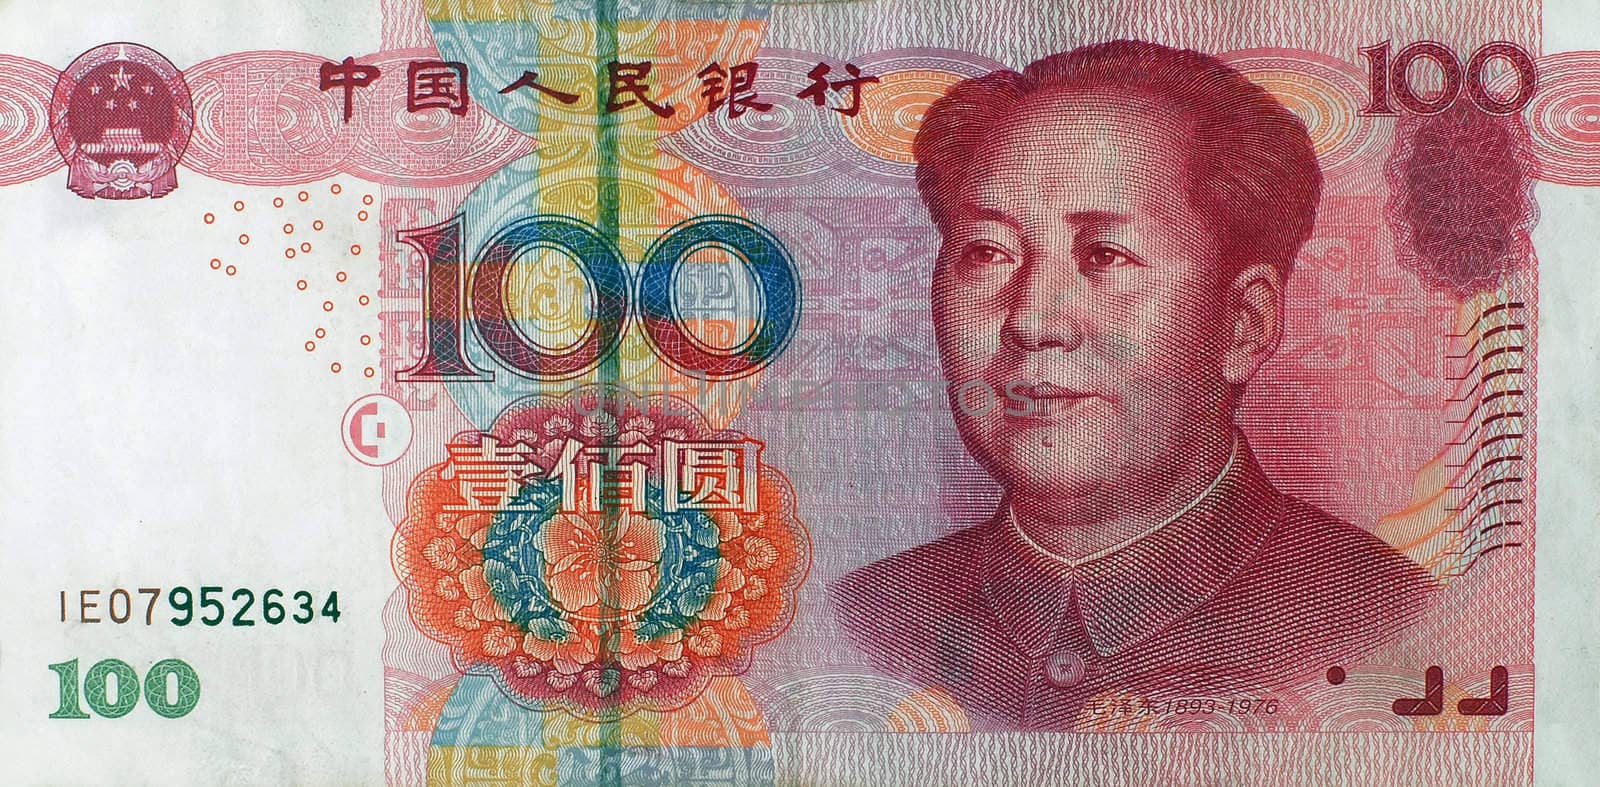 Hundred Yuan banknote by Vectorex